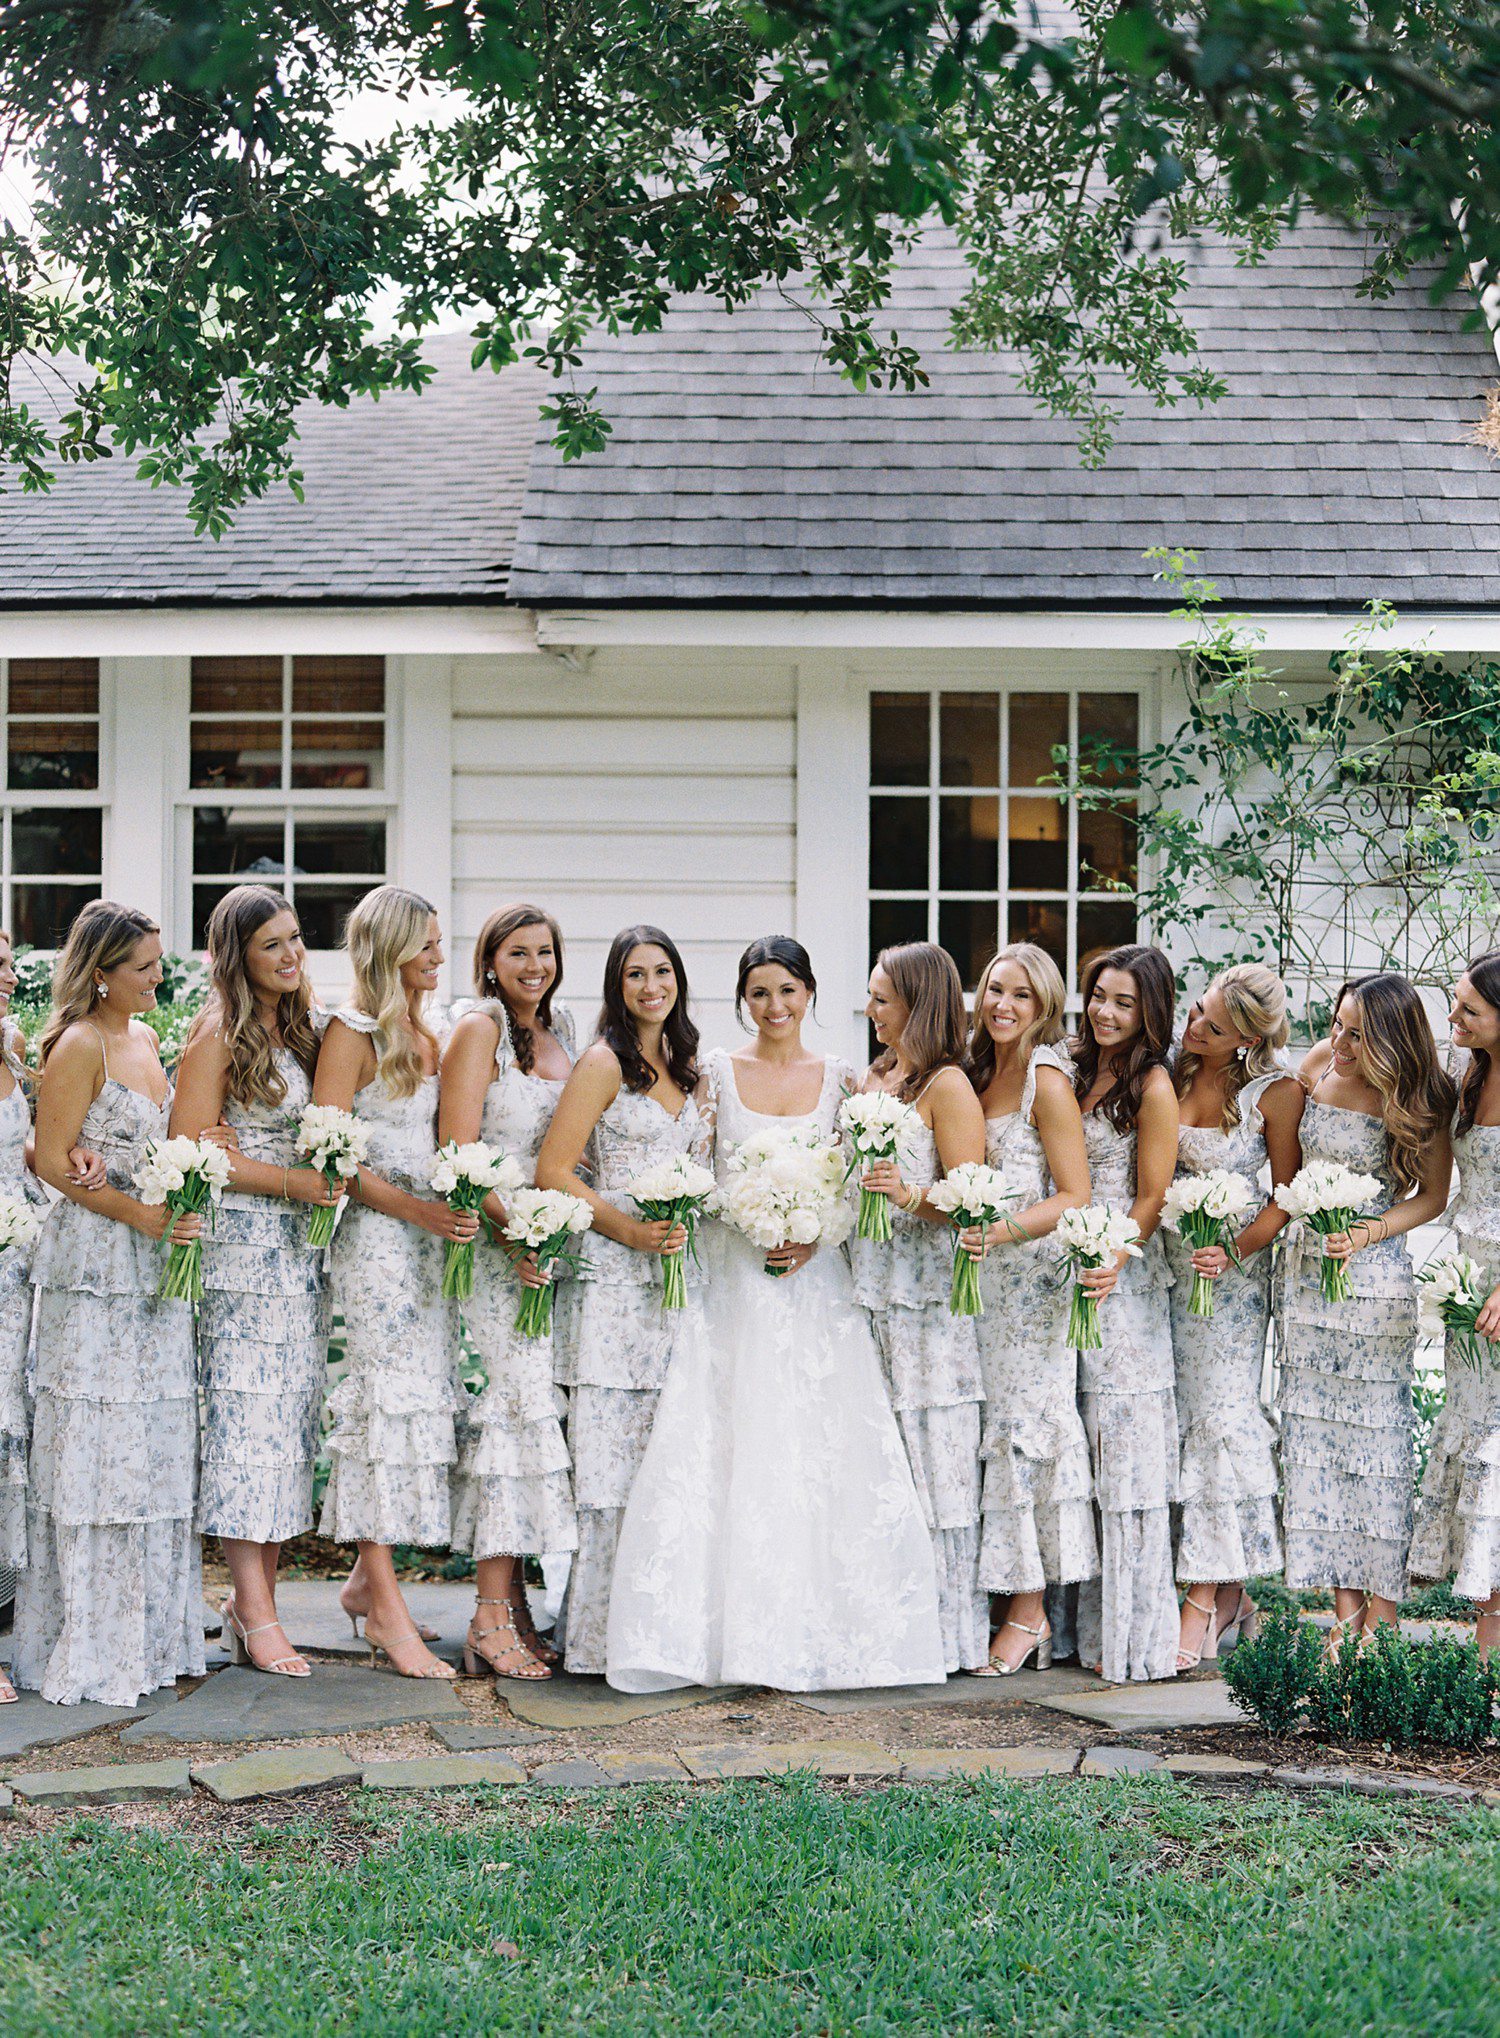 Bride and bridesmaid photos with white floral pattern dress and white bouquets.